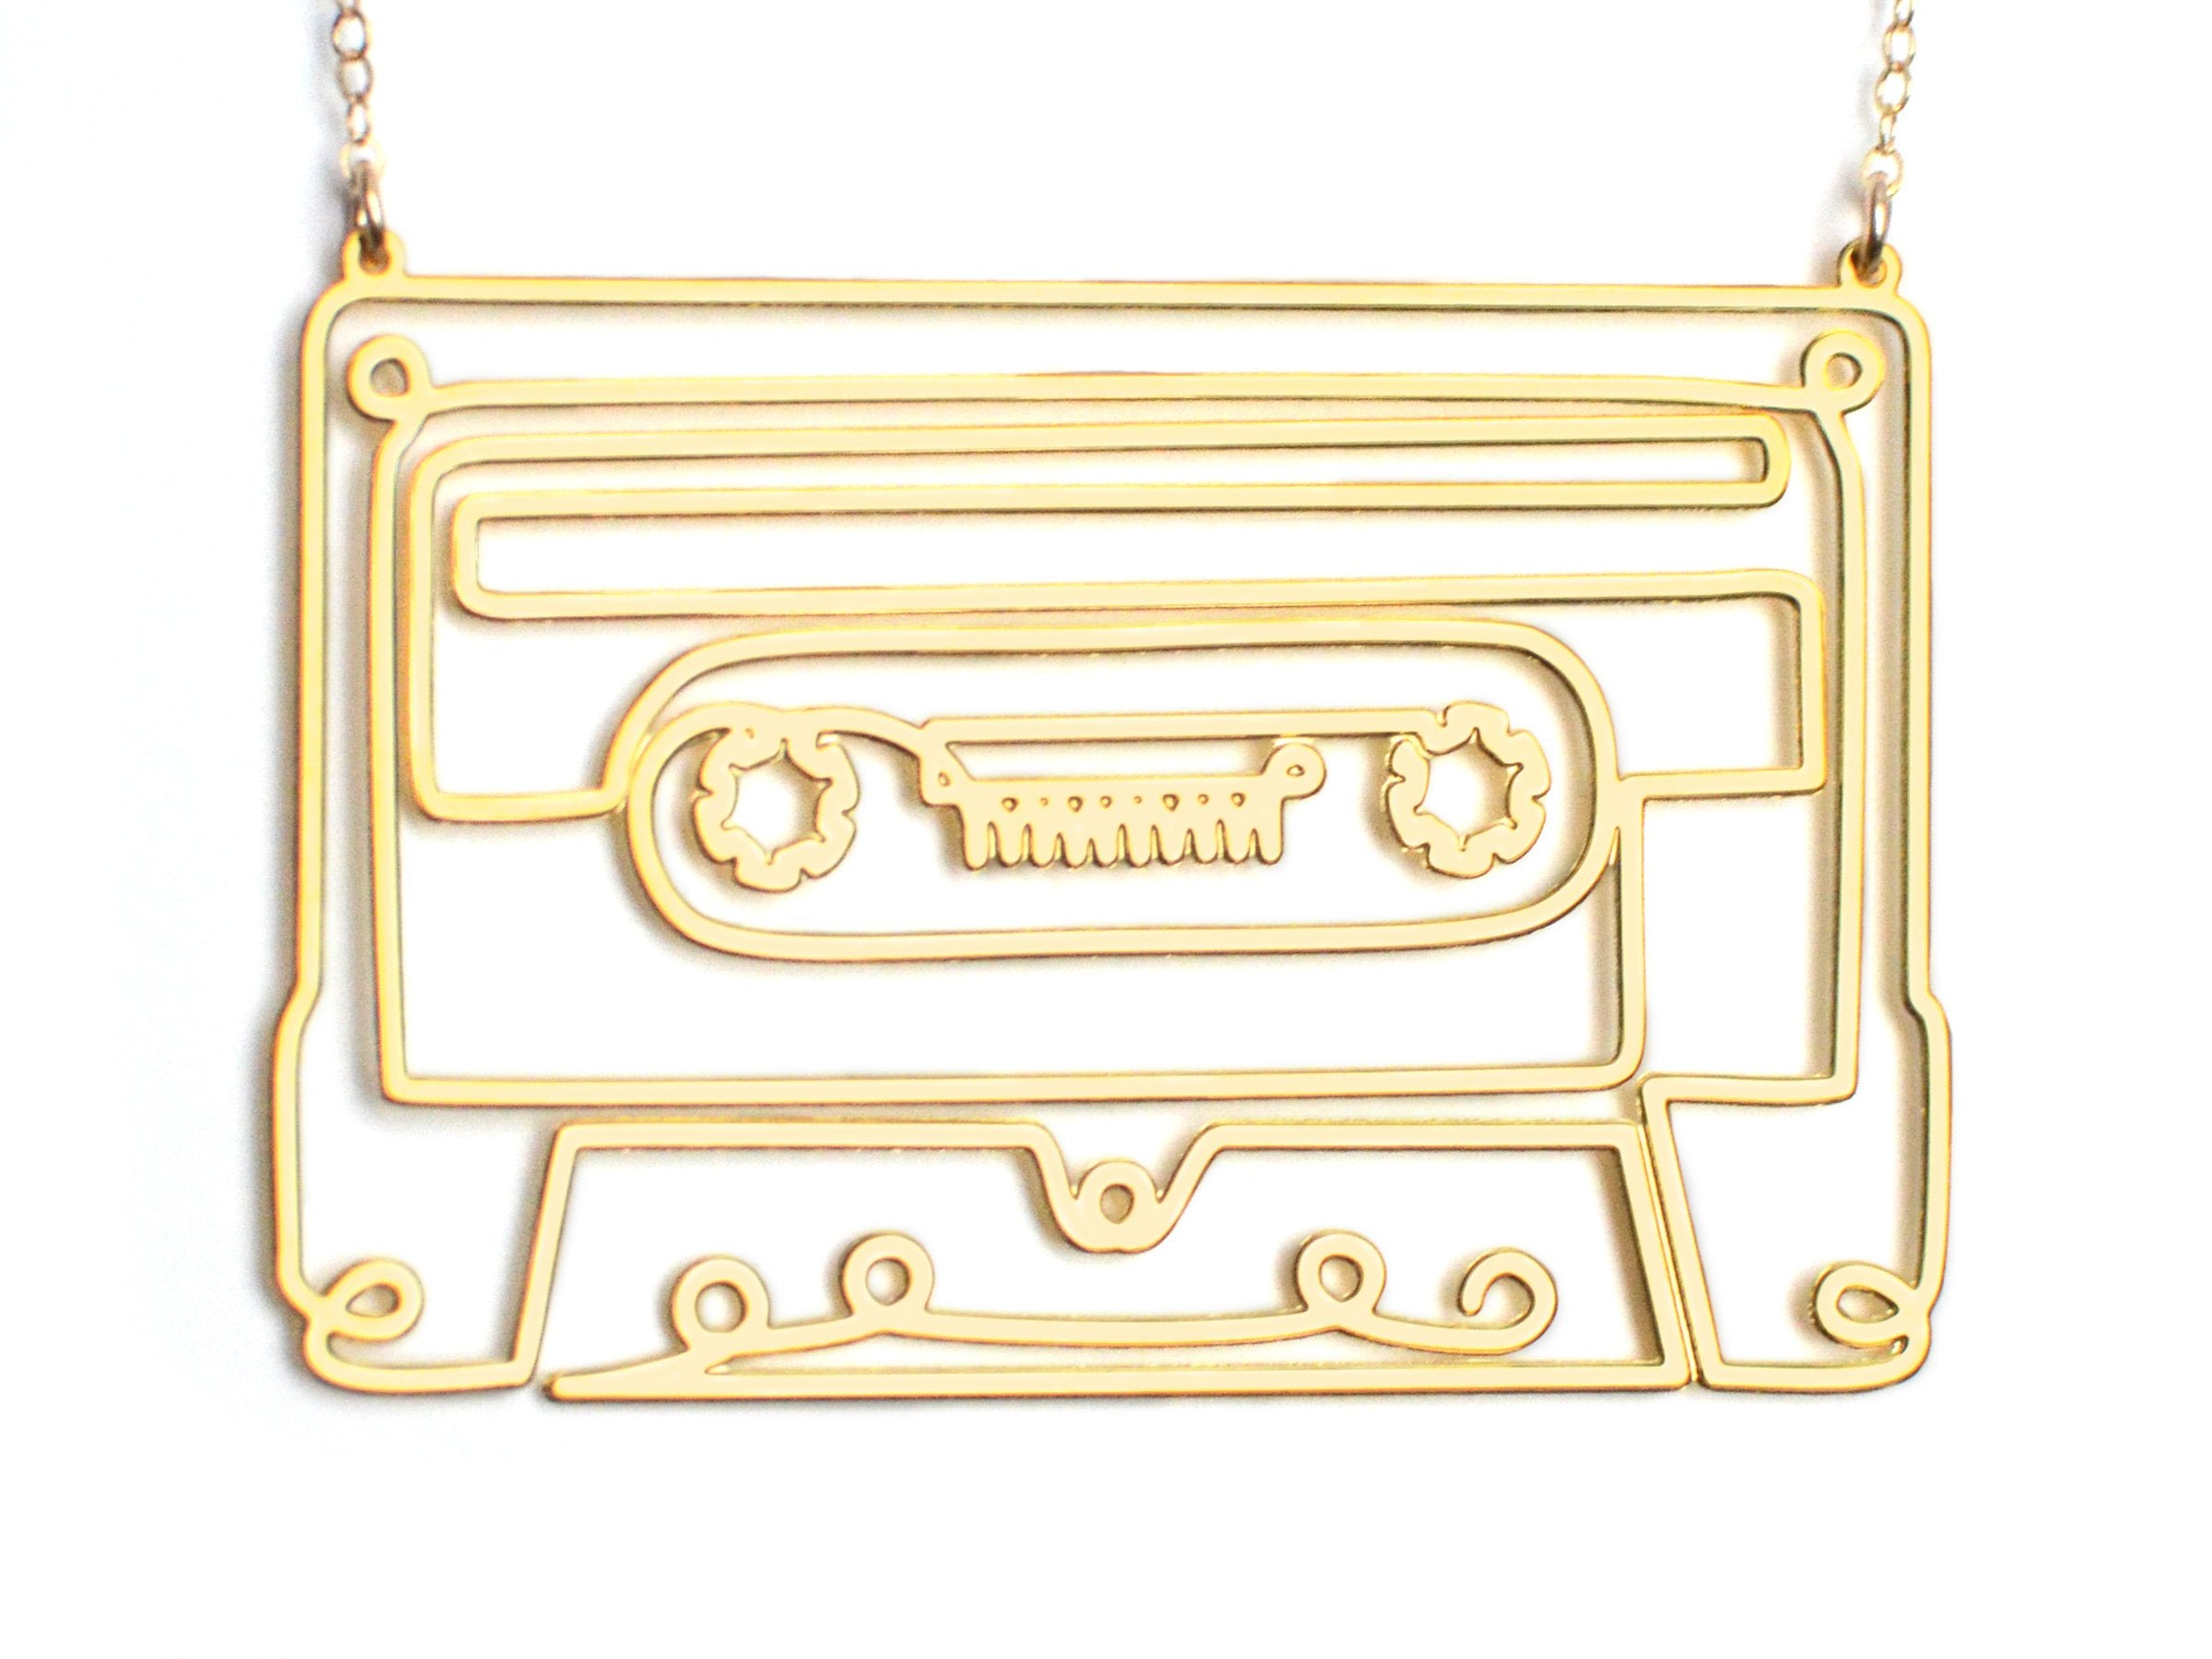 Cassette Necklace - High Quality, Affordable, Hand Drawn, Courageous Creators Necklace - Available in Gold and Silver - Made in USA - Collaboration with Honto88 - Brevity Jewelry